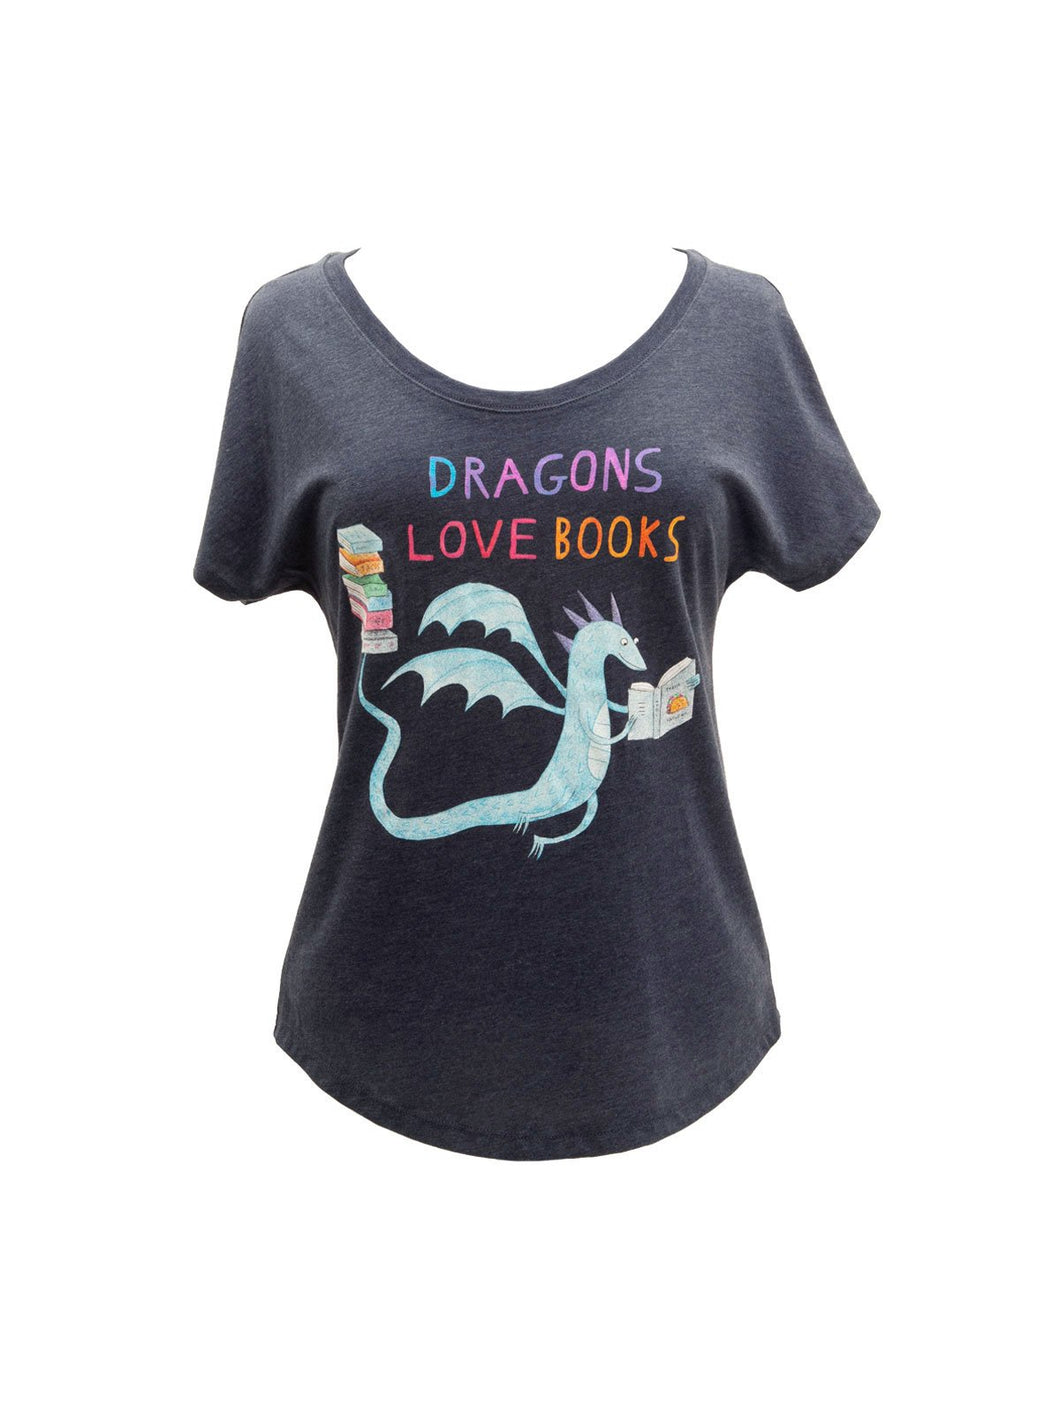 Dragons Love Books Women’s Relaxed Fit T-Shirt Size M